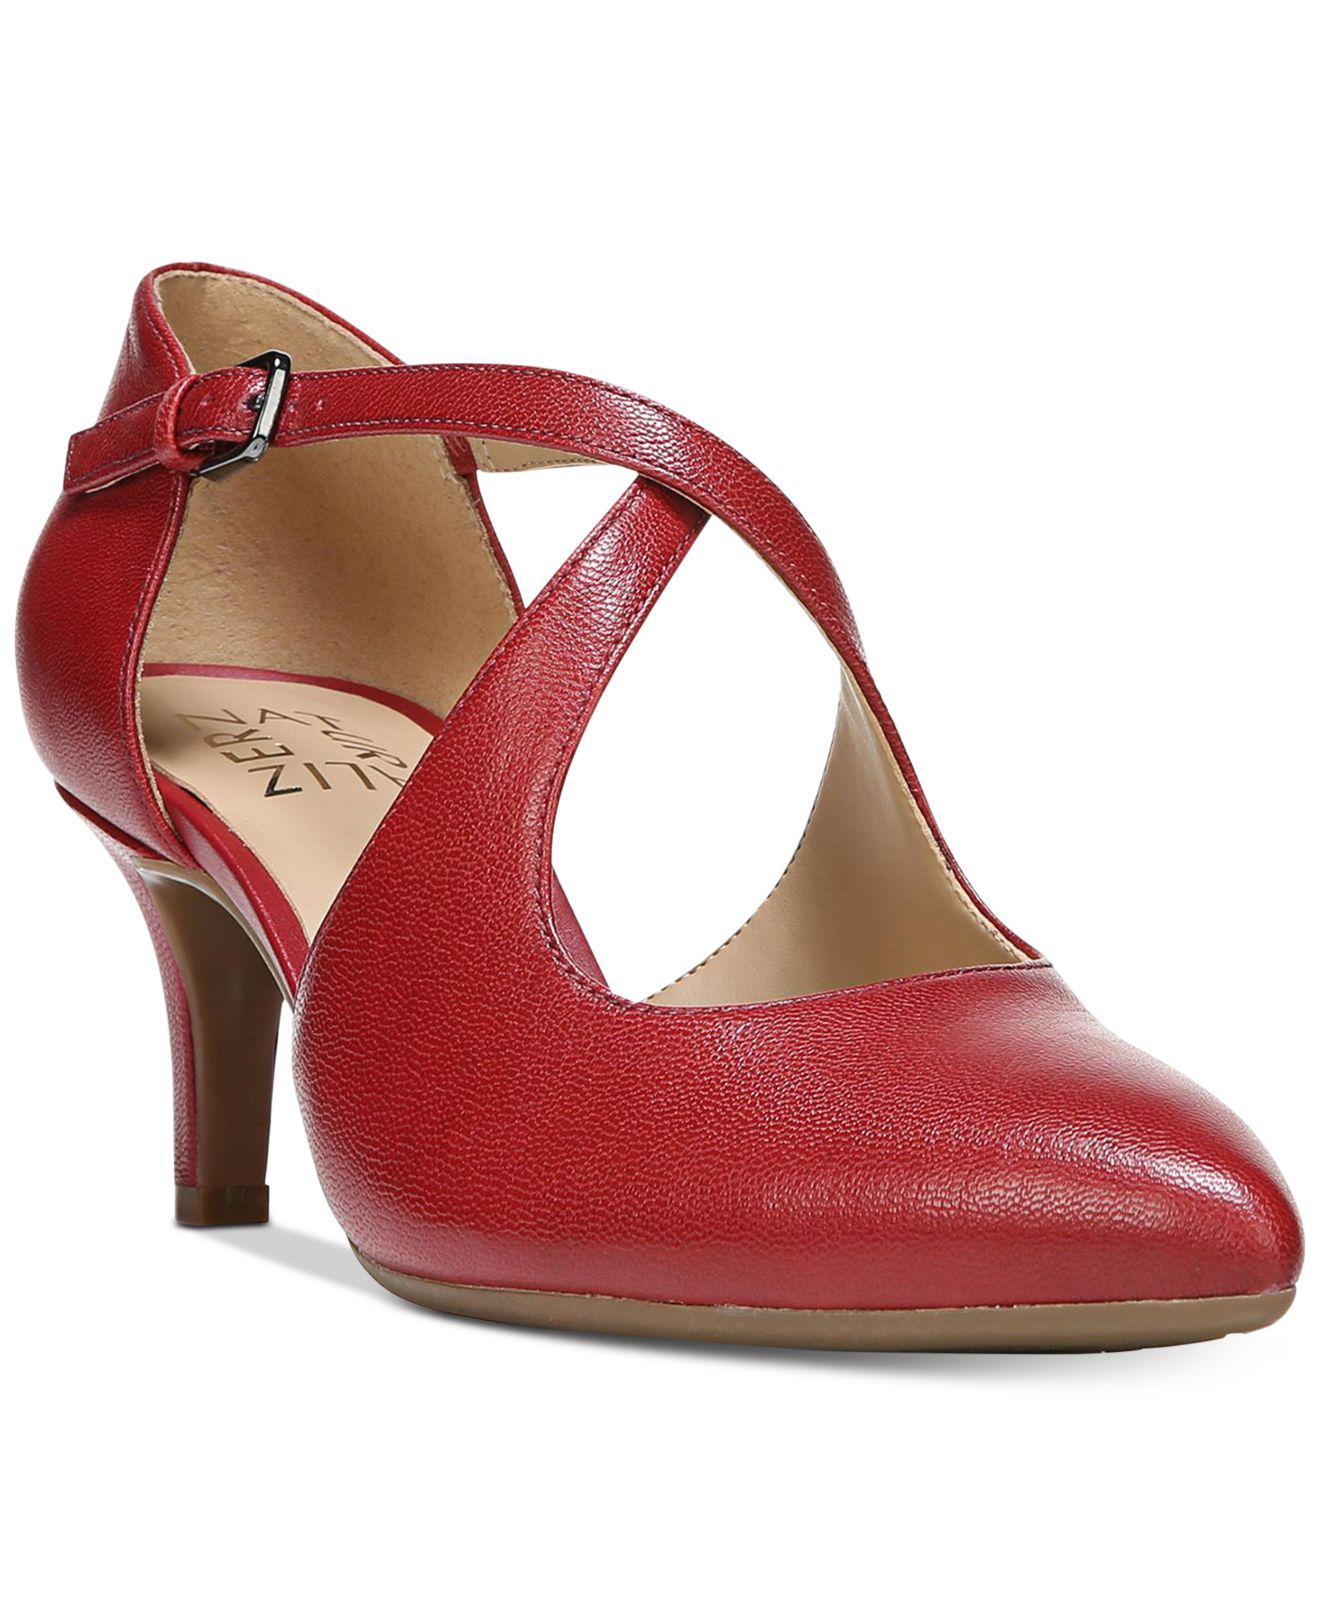 Lyst - Naturalizer Okira Pumps in Red